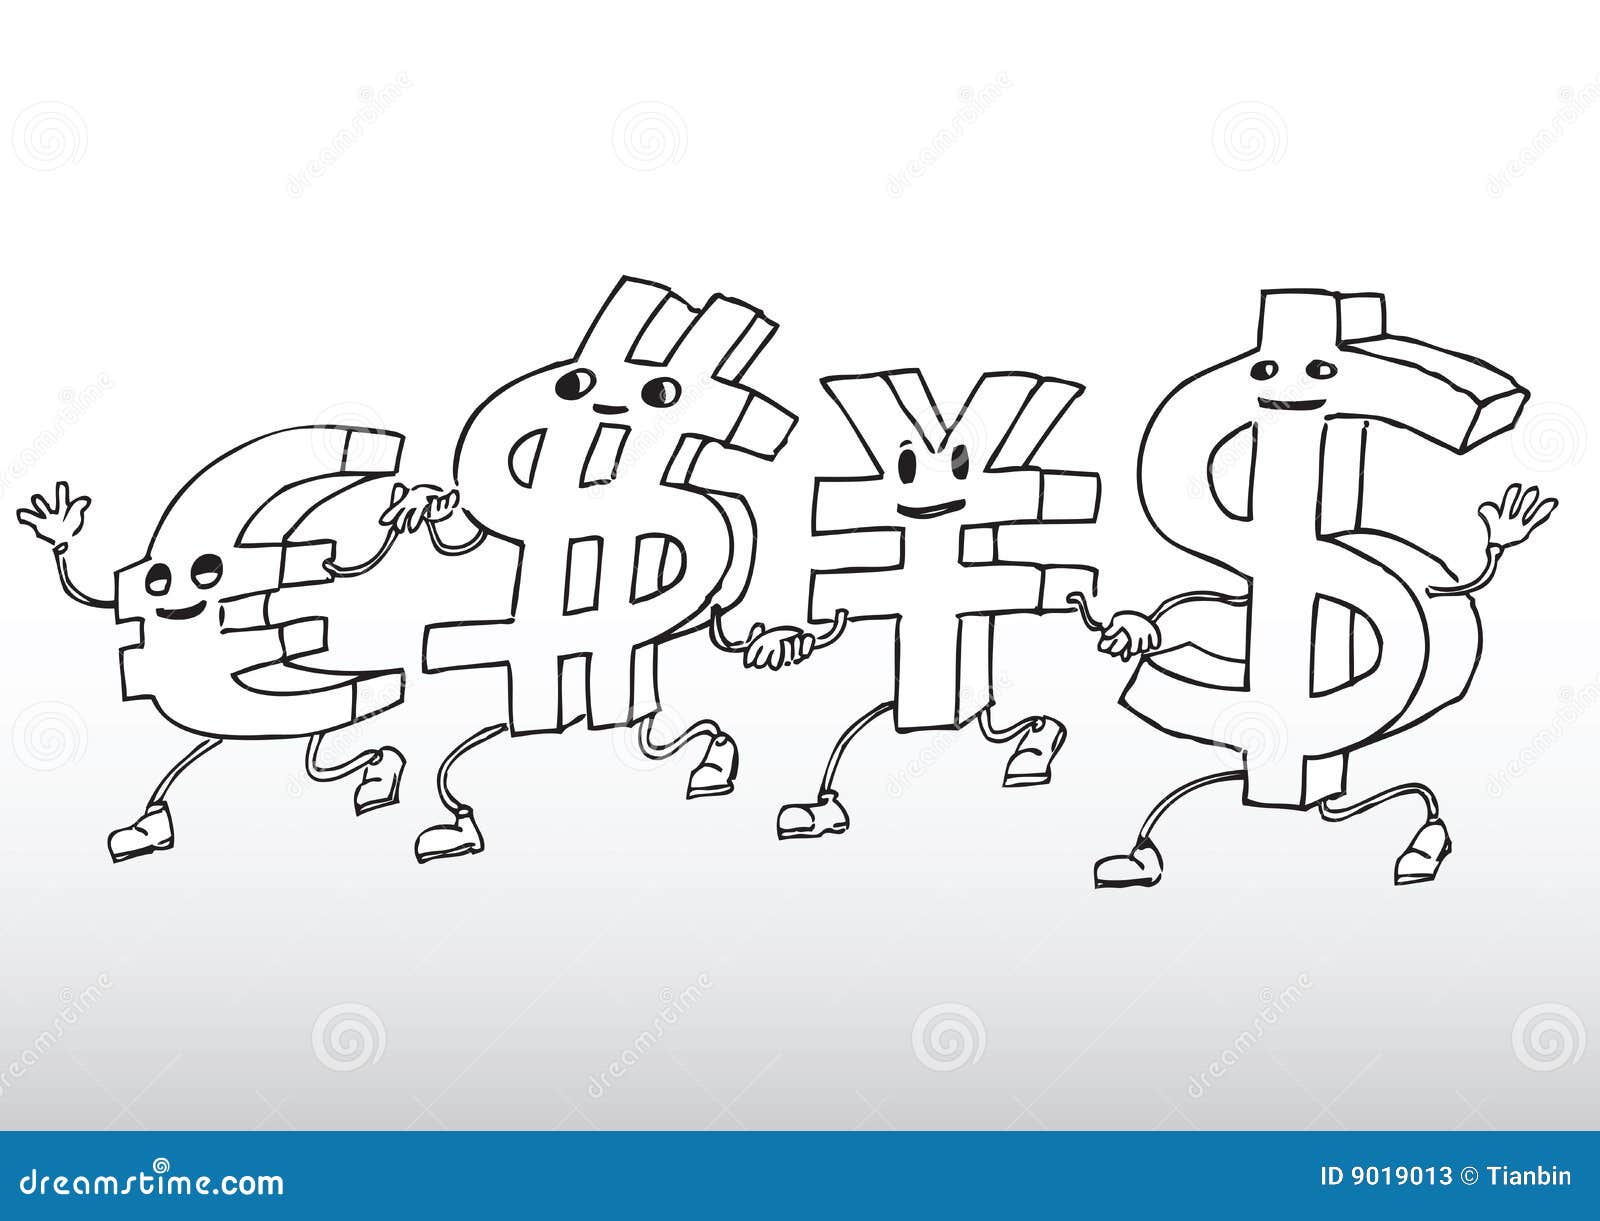 Currency cartoon stock vector. Illustration of comic, eyes - 9019013